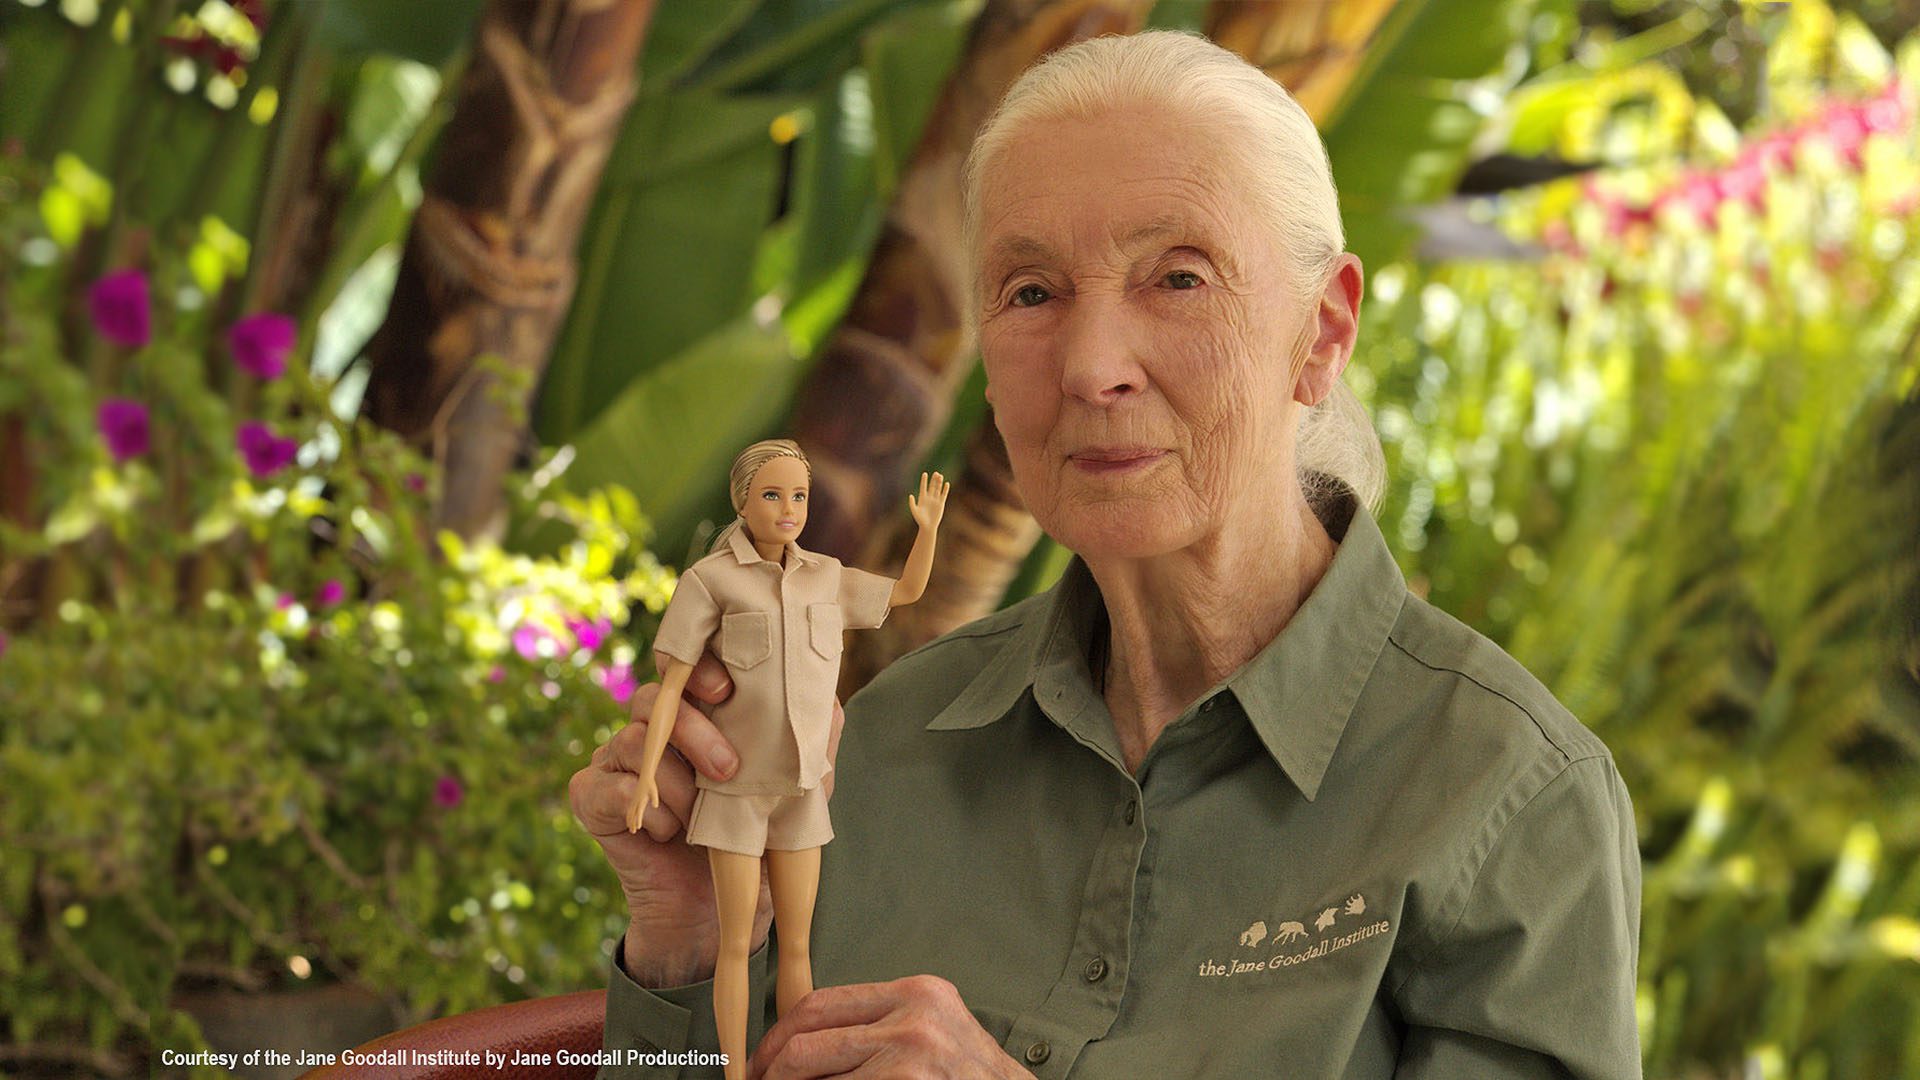 Dr. Jane Goodall and her Barbie